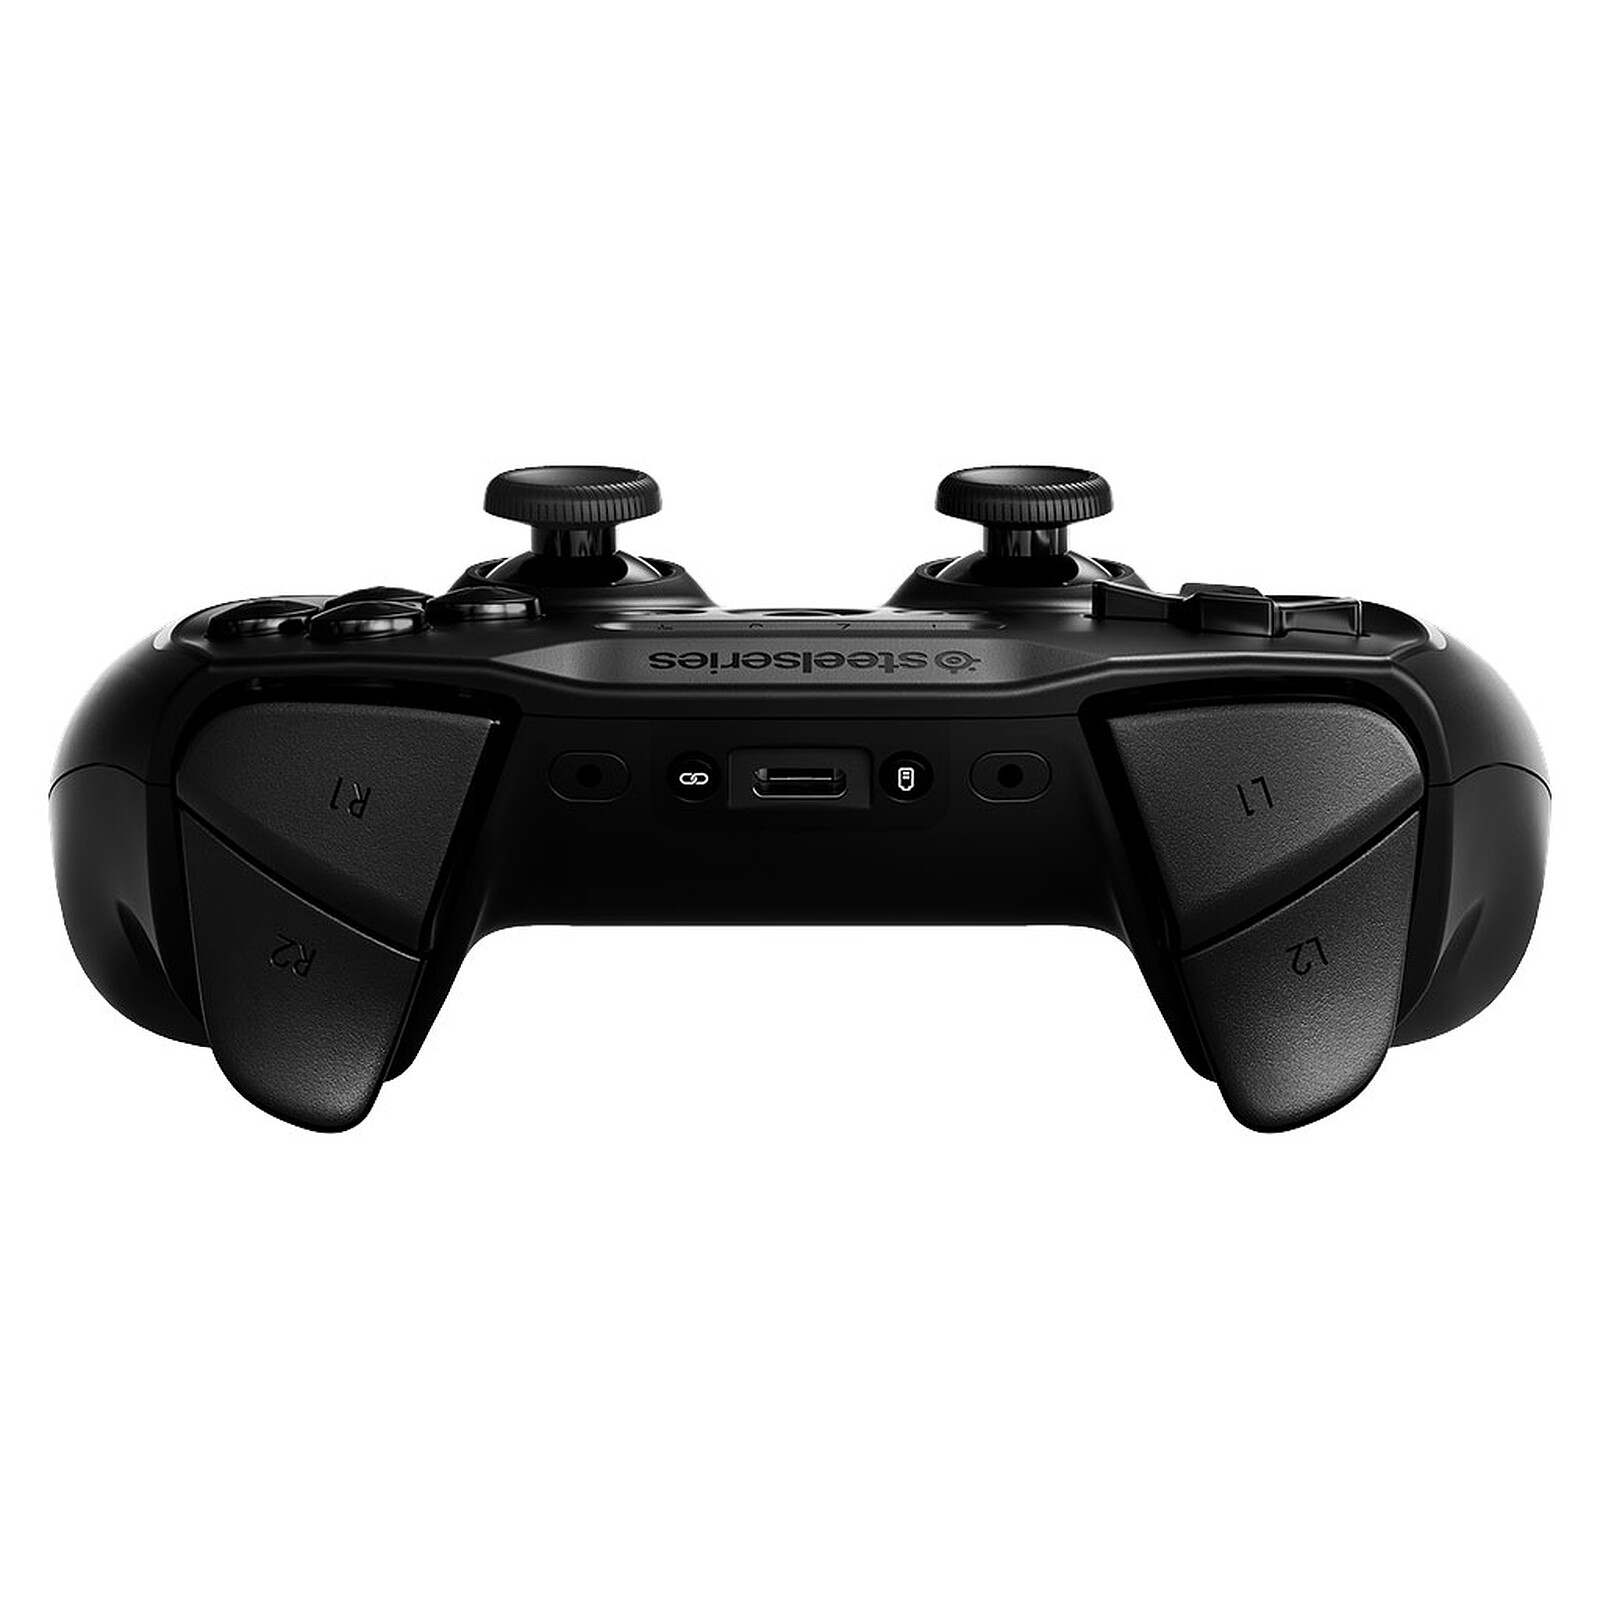 Manette Spirit Of Gamer Manette gamer predator sans fil bluetooth avec  support smartphone, pour ios apple tv, android, cloud gaming, pc, ps4, ps3